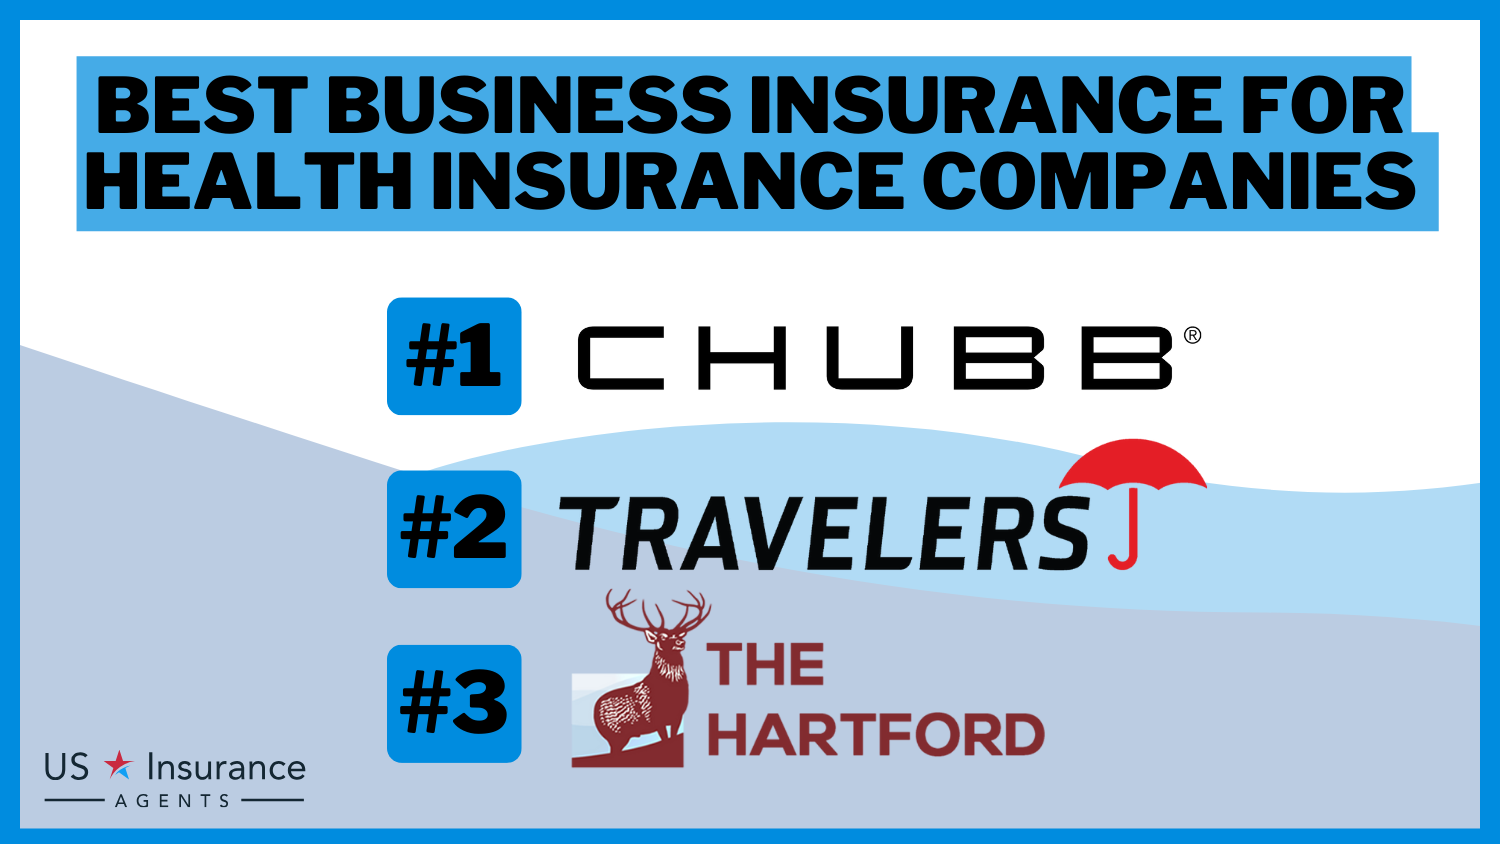 Chubb, Travelers and The Hartford: Best Business Insurance for Health Insurance Companies